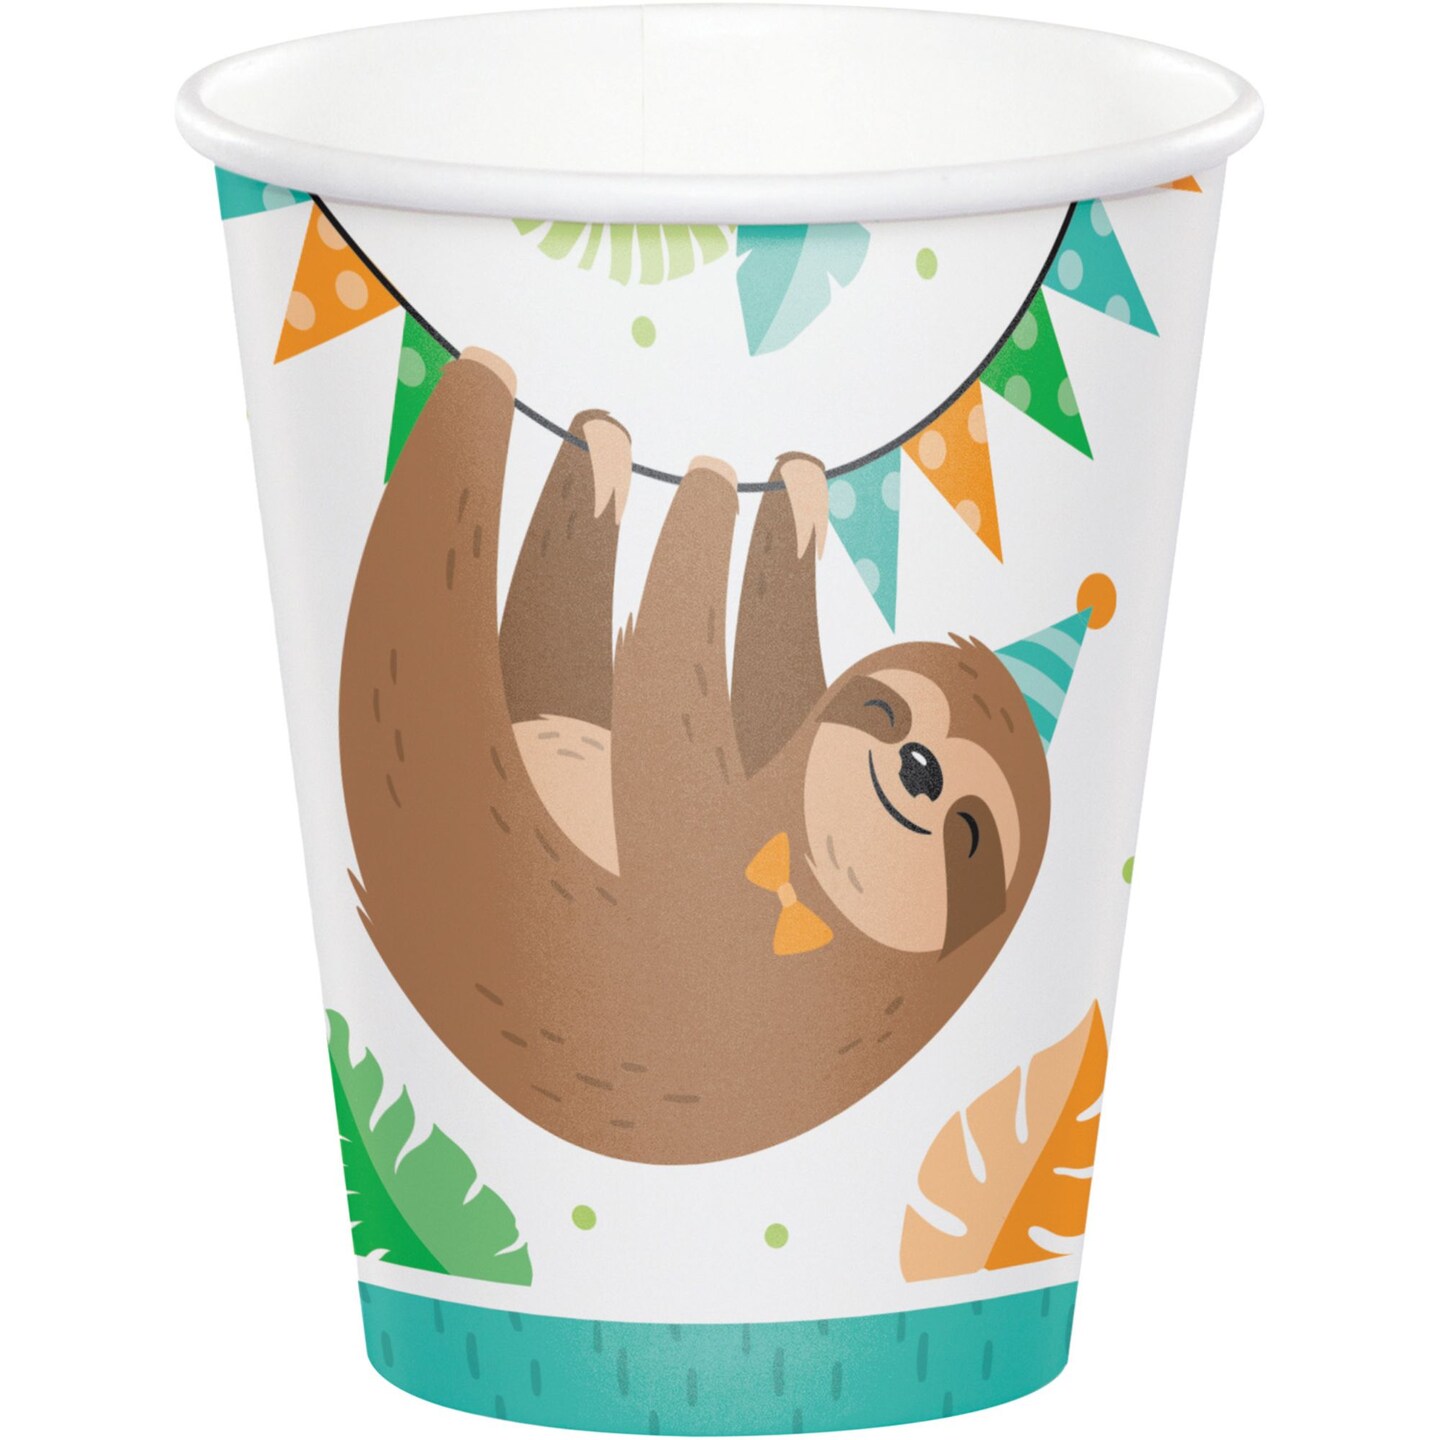 Party Central Club Pack of 96 White Sloth Party Disposable Paper Drinking Party Tumbler Cups 9 oz.